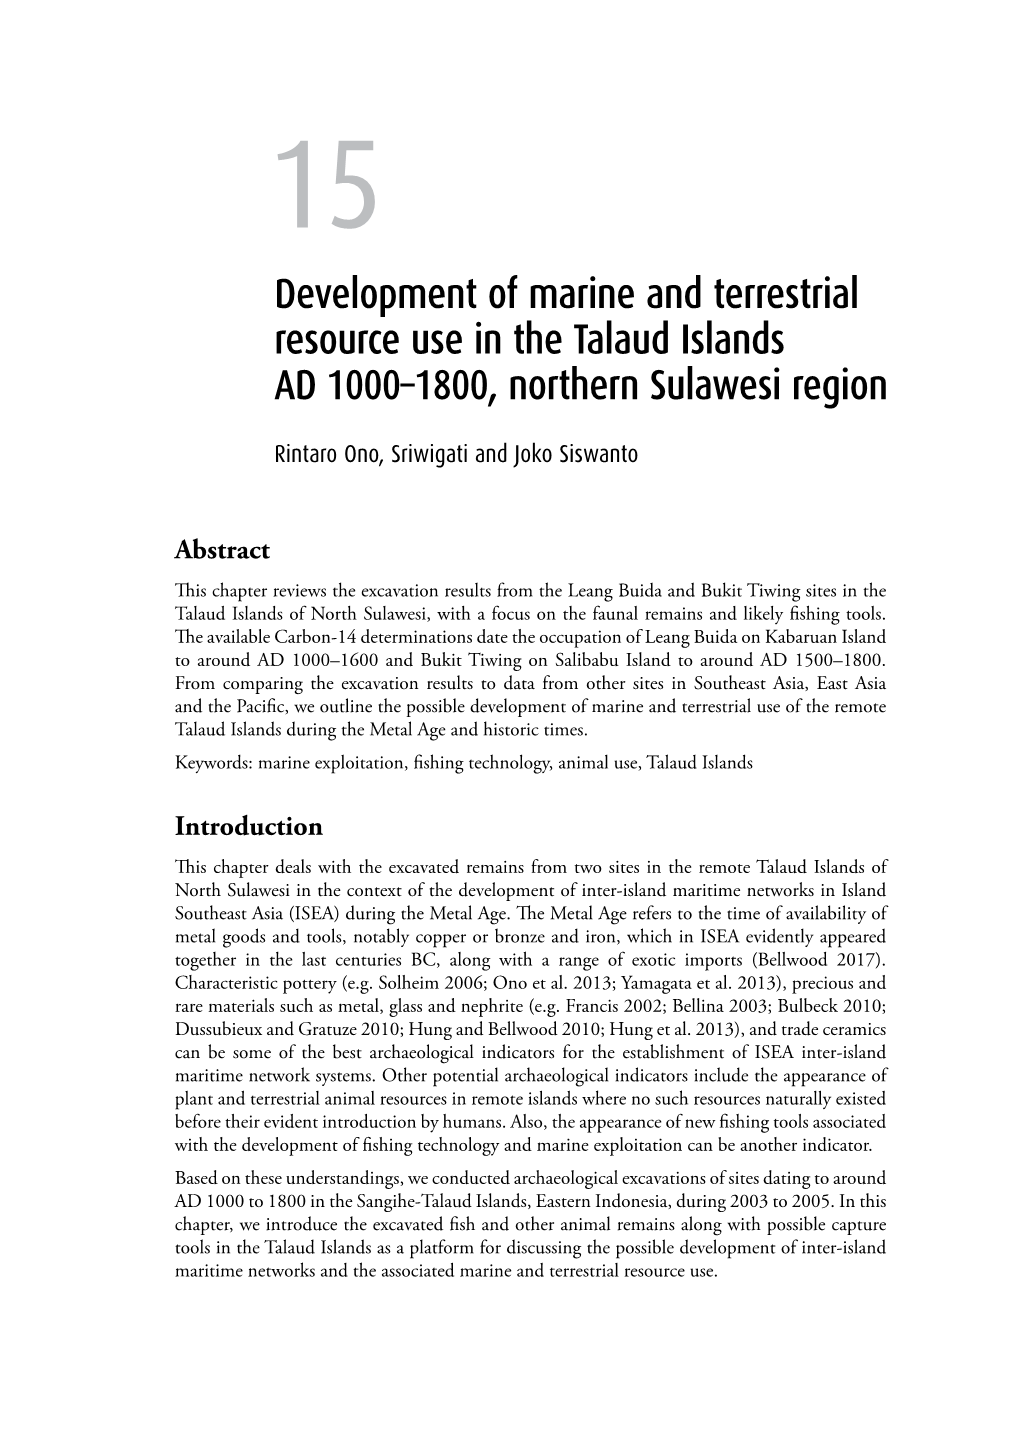 15. Development of Marine and Terrestrial Resource Use in the Talaud Islands AD 1000–1800 245